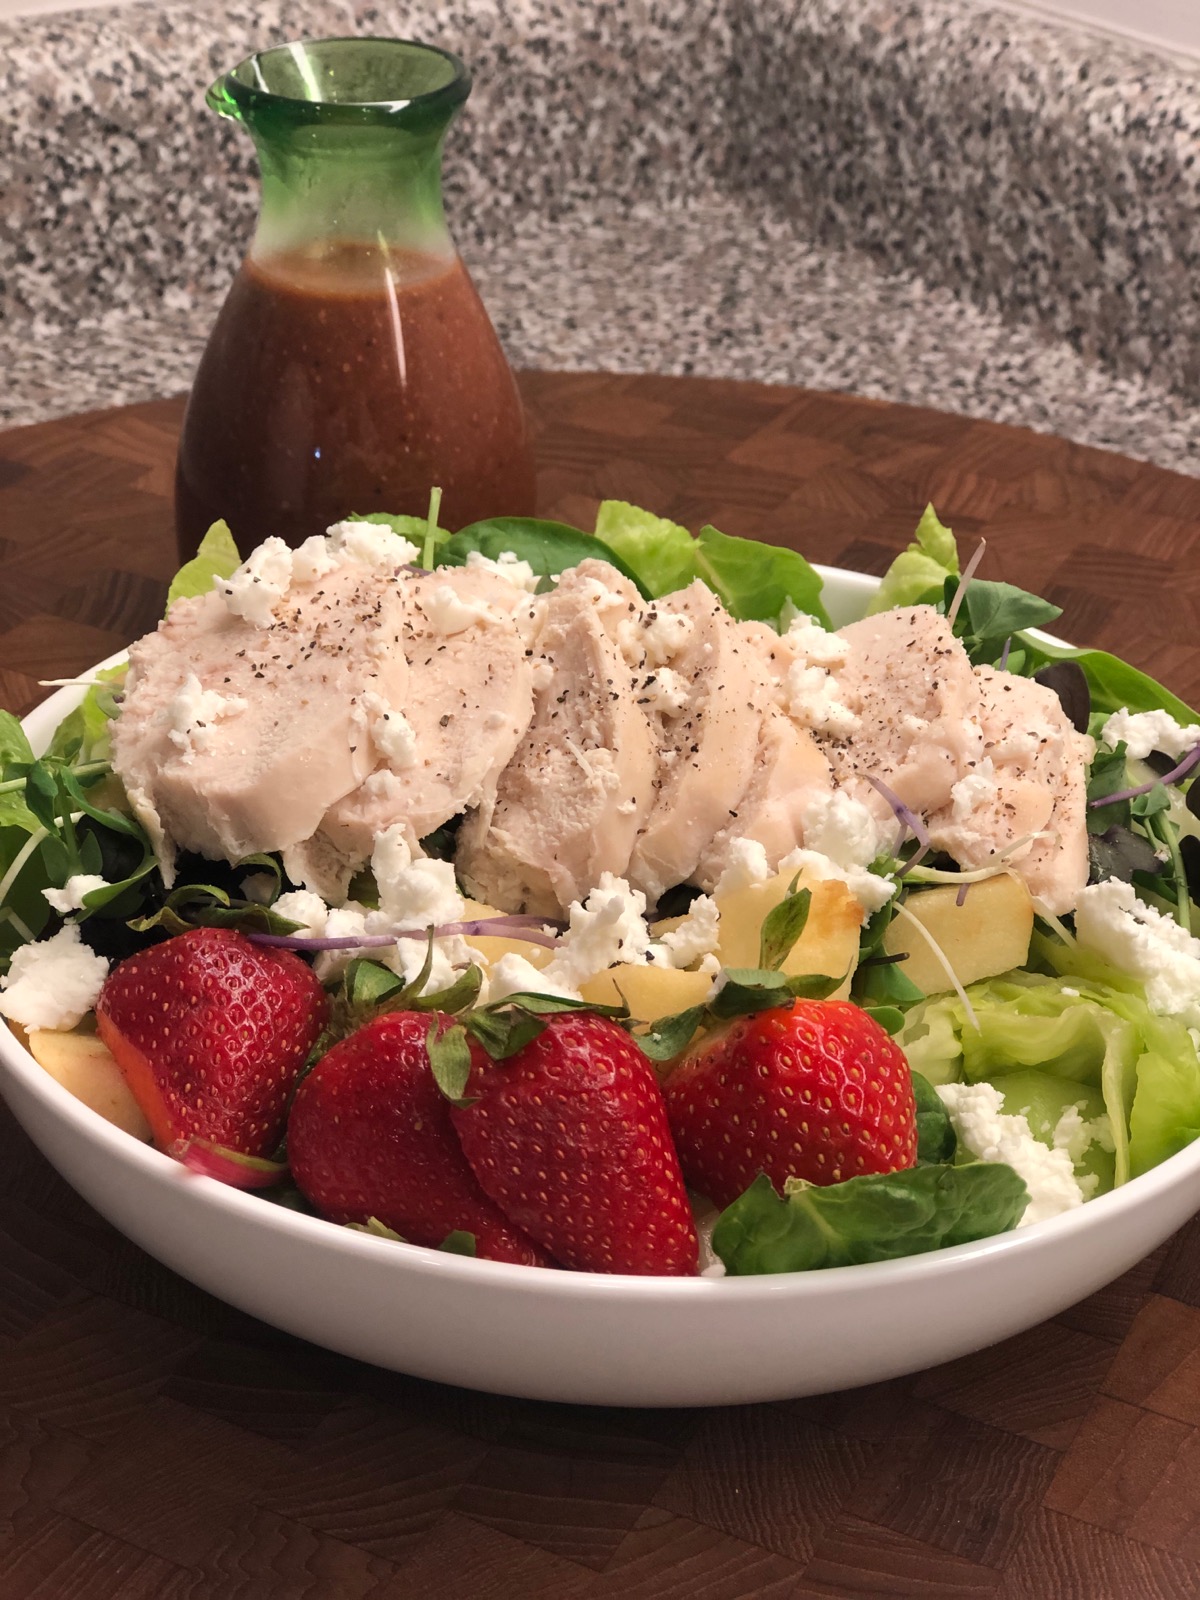 Strawberry-Feta Chicken Salad with Roasted Strawberry-Balsamic Dressing